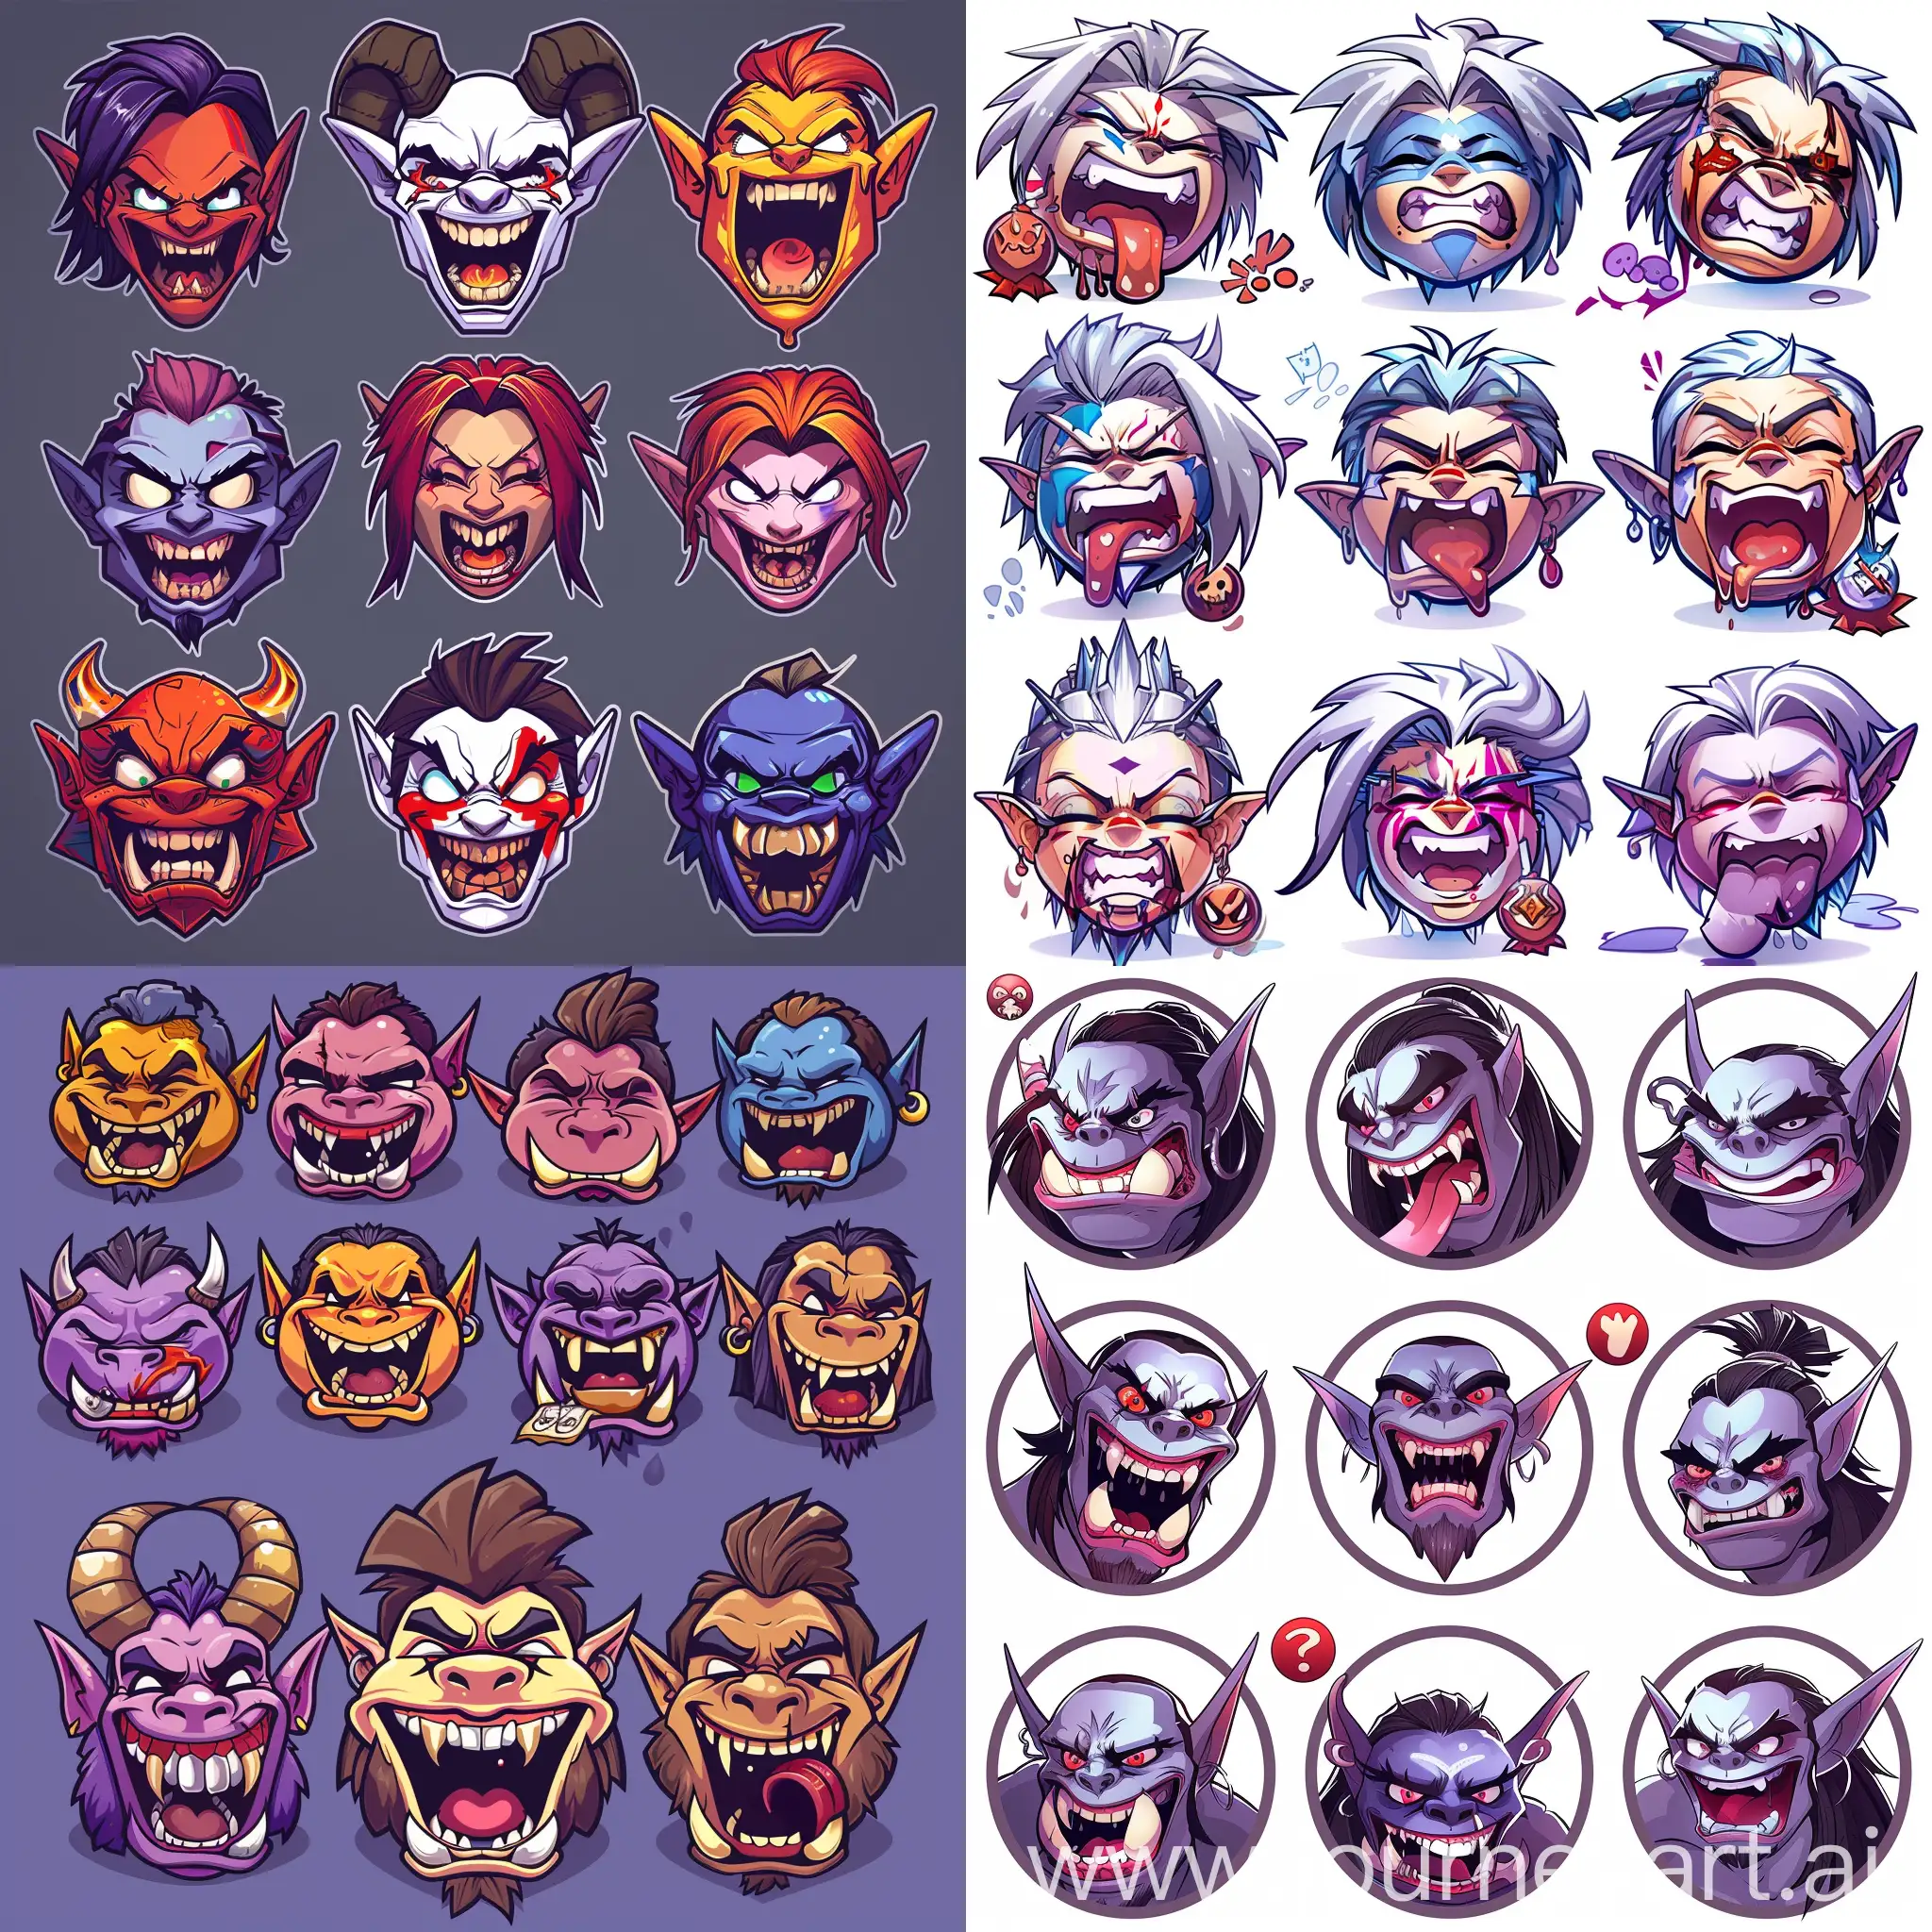 Voljin-from-World-of-Warcraft-with-Twitch-Emoji-Expressions-in-Anime-Style